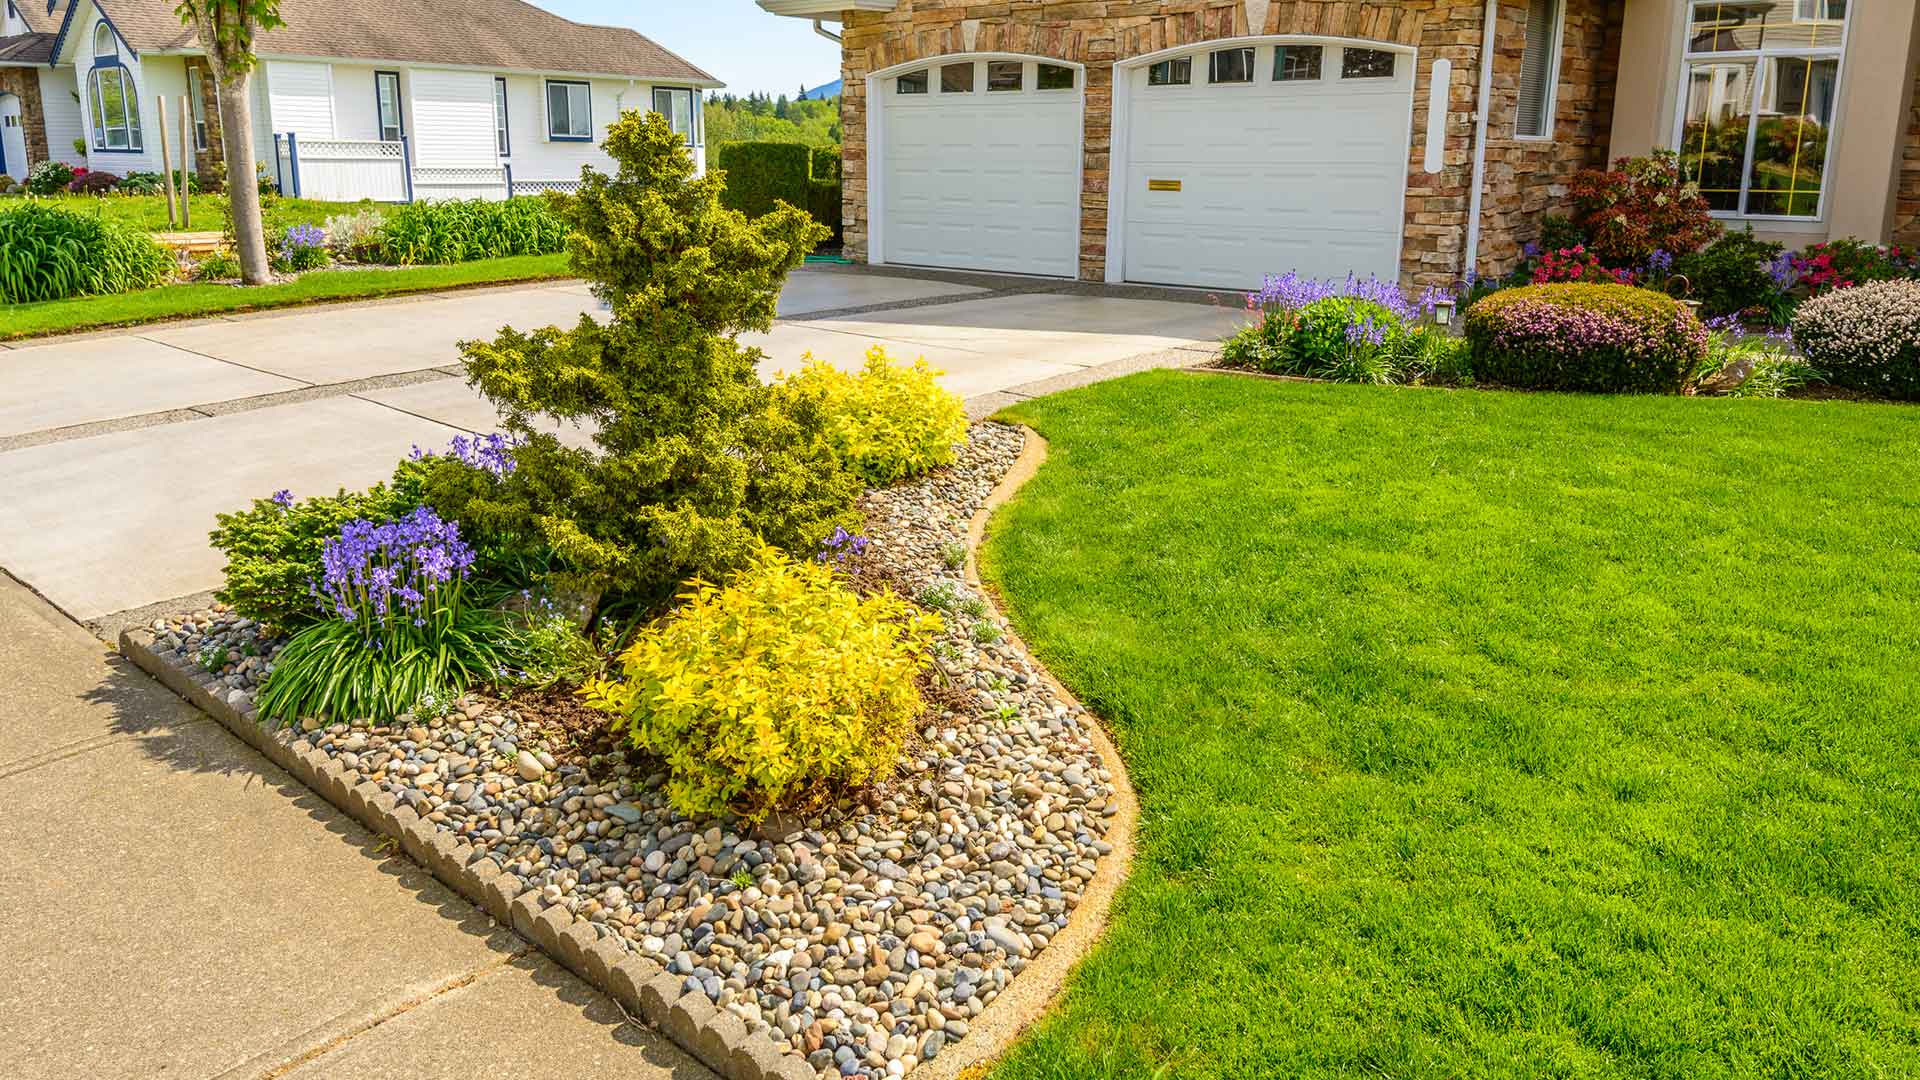 Winter Is the Best Time to Start Planning Your Spring Landscaping Projects!